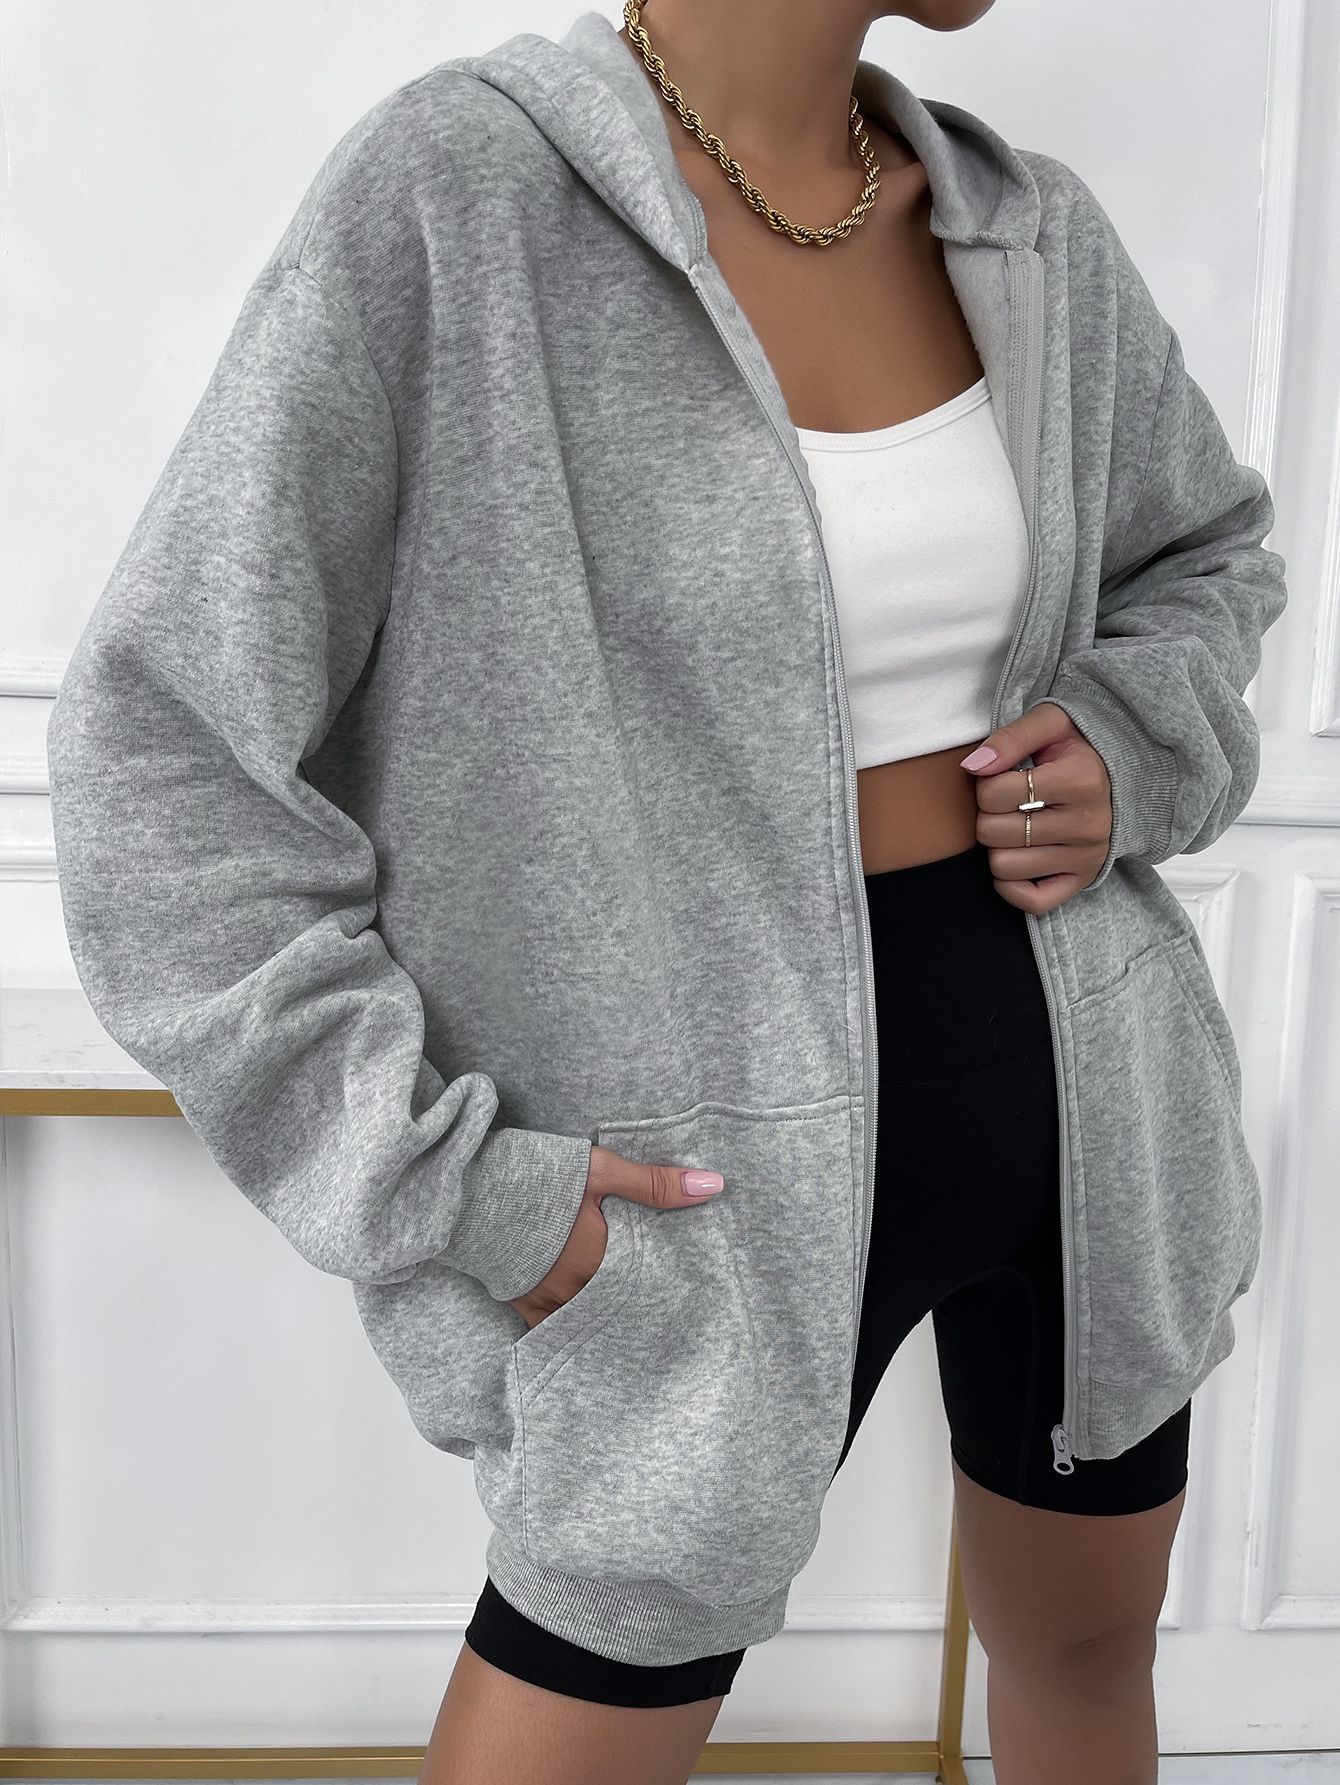 How to Style Grey Hoodie: Top 15 Casual Outfit Ideas for Women